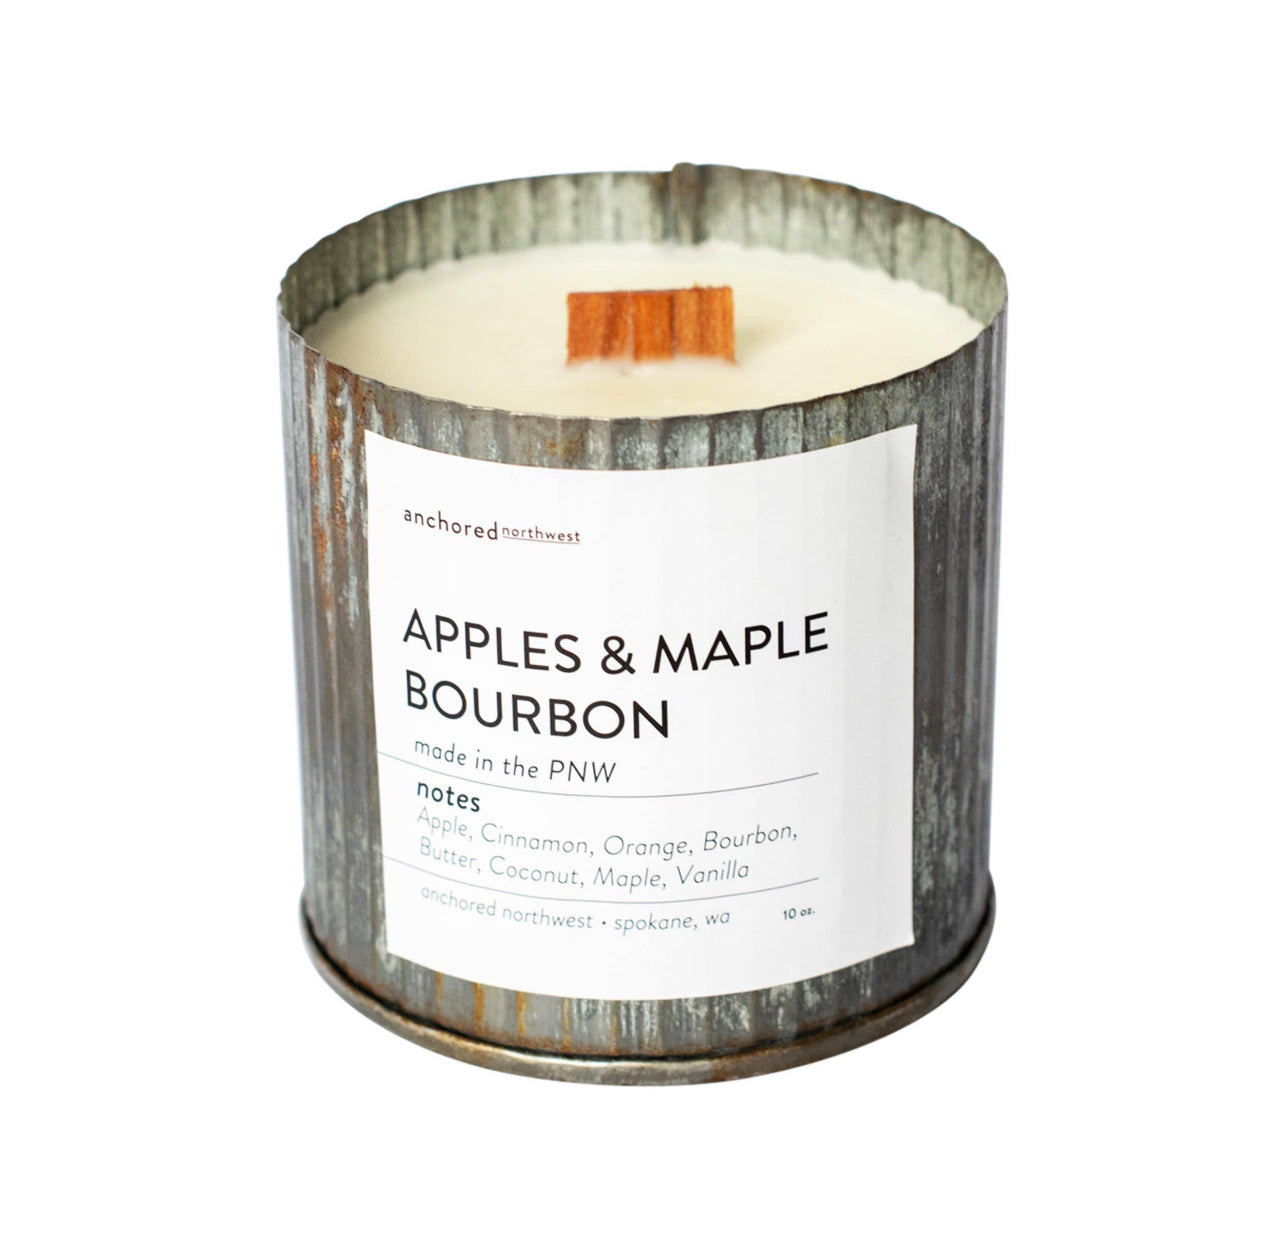 Apples & Maple Bourbon Wood Wick Rustic Soy Candle